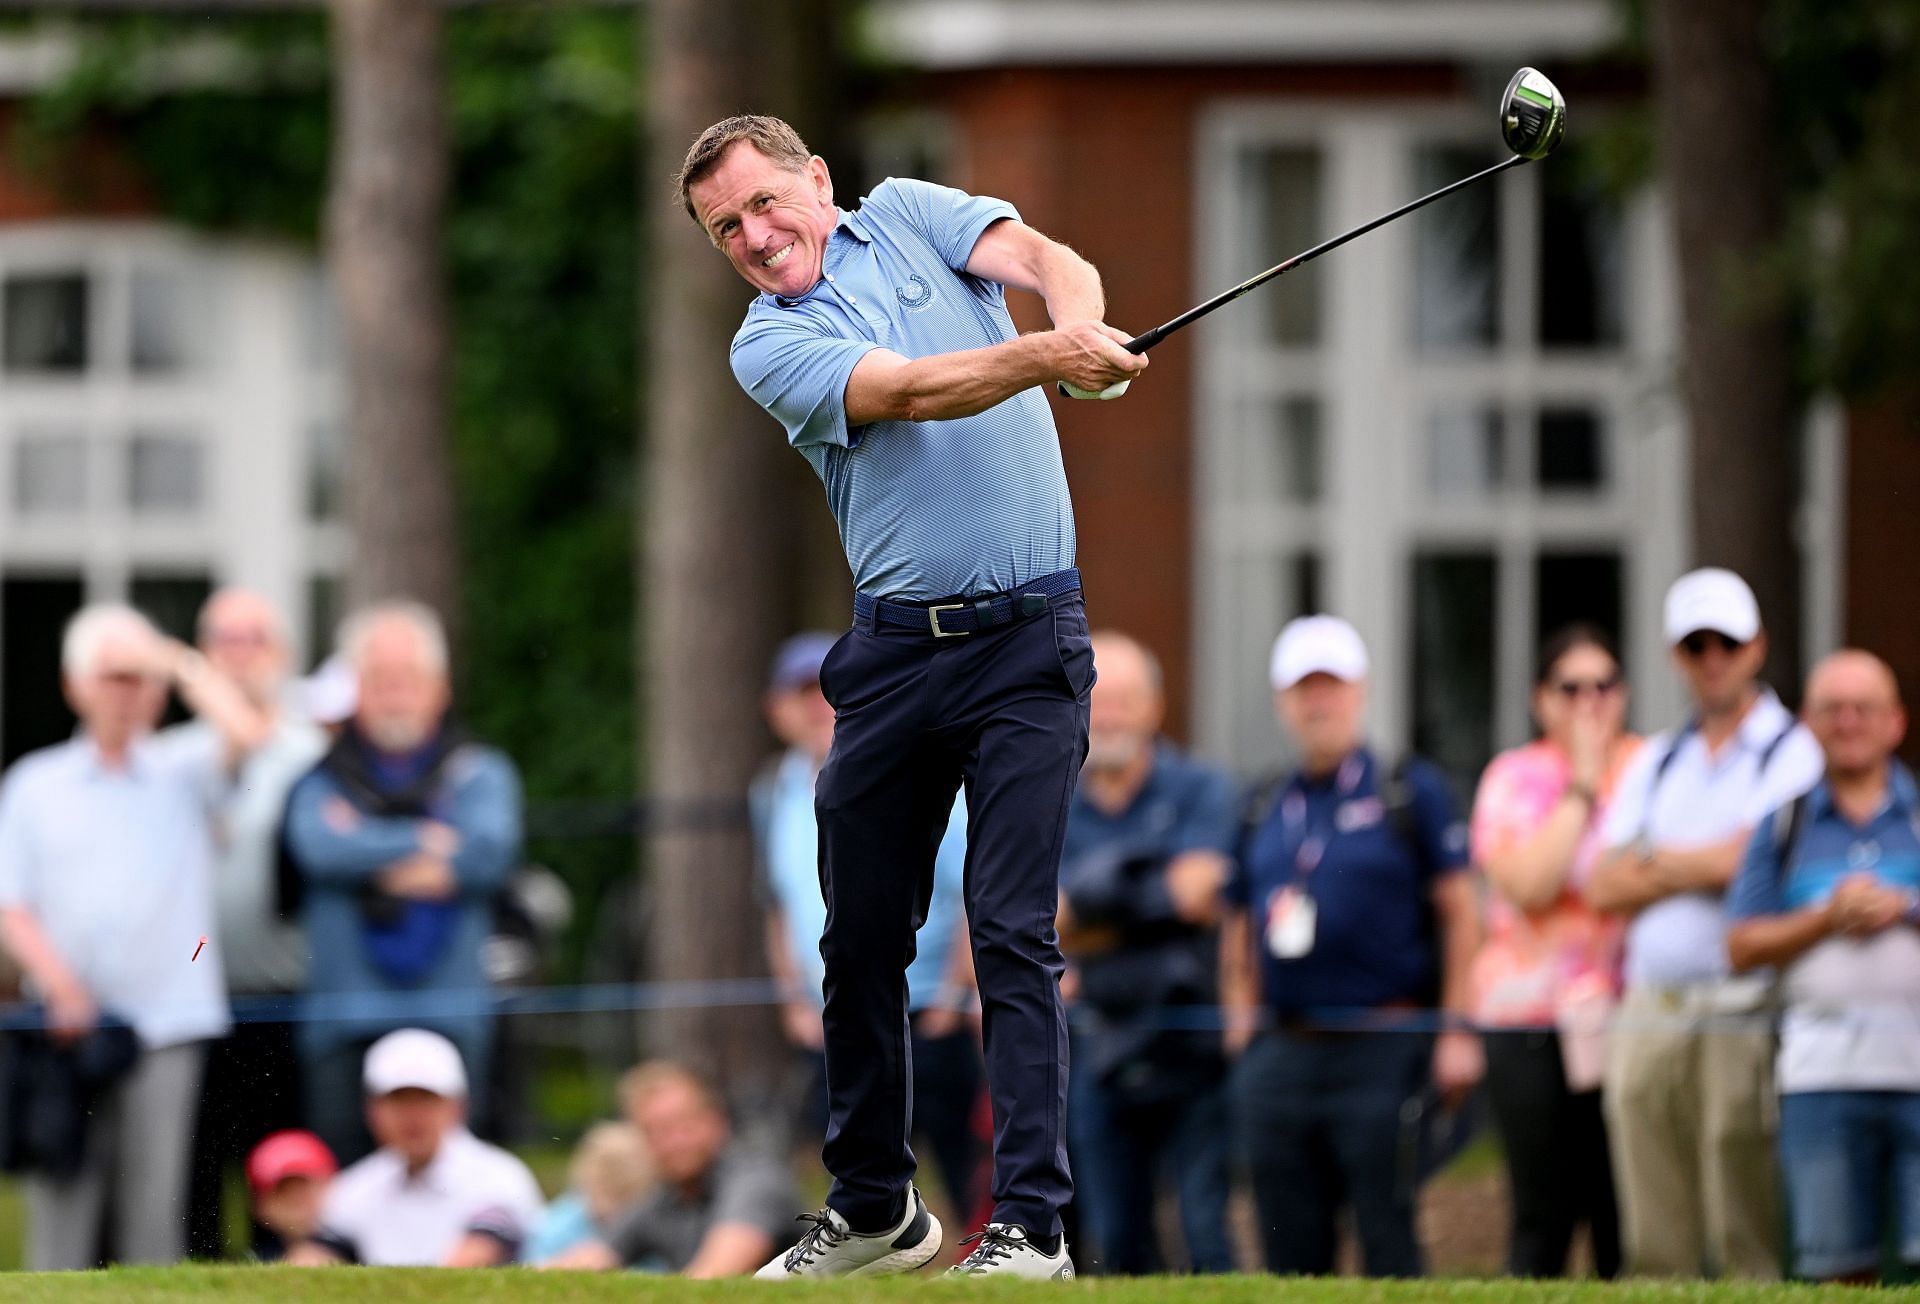 Ap McCoy at the Betfred British Masters 2023 (Image via Getty)